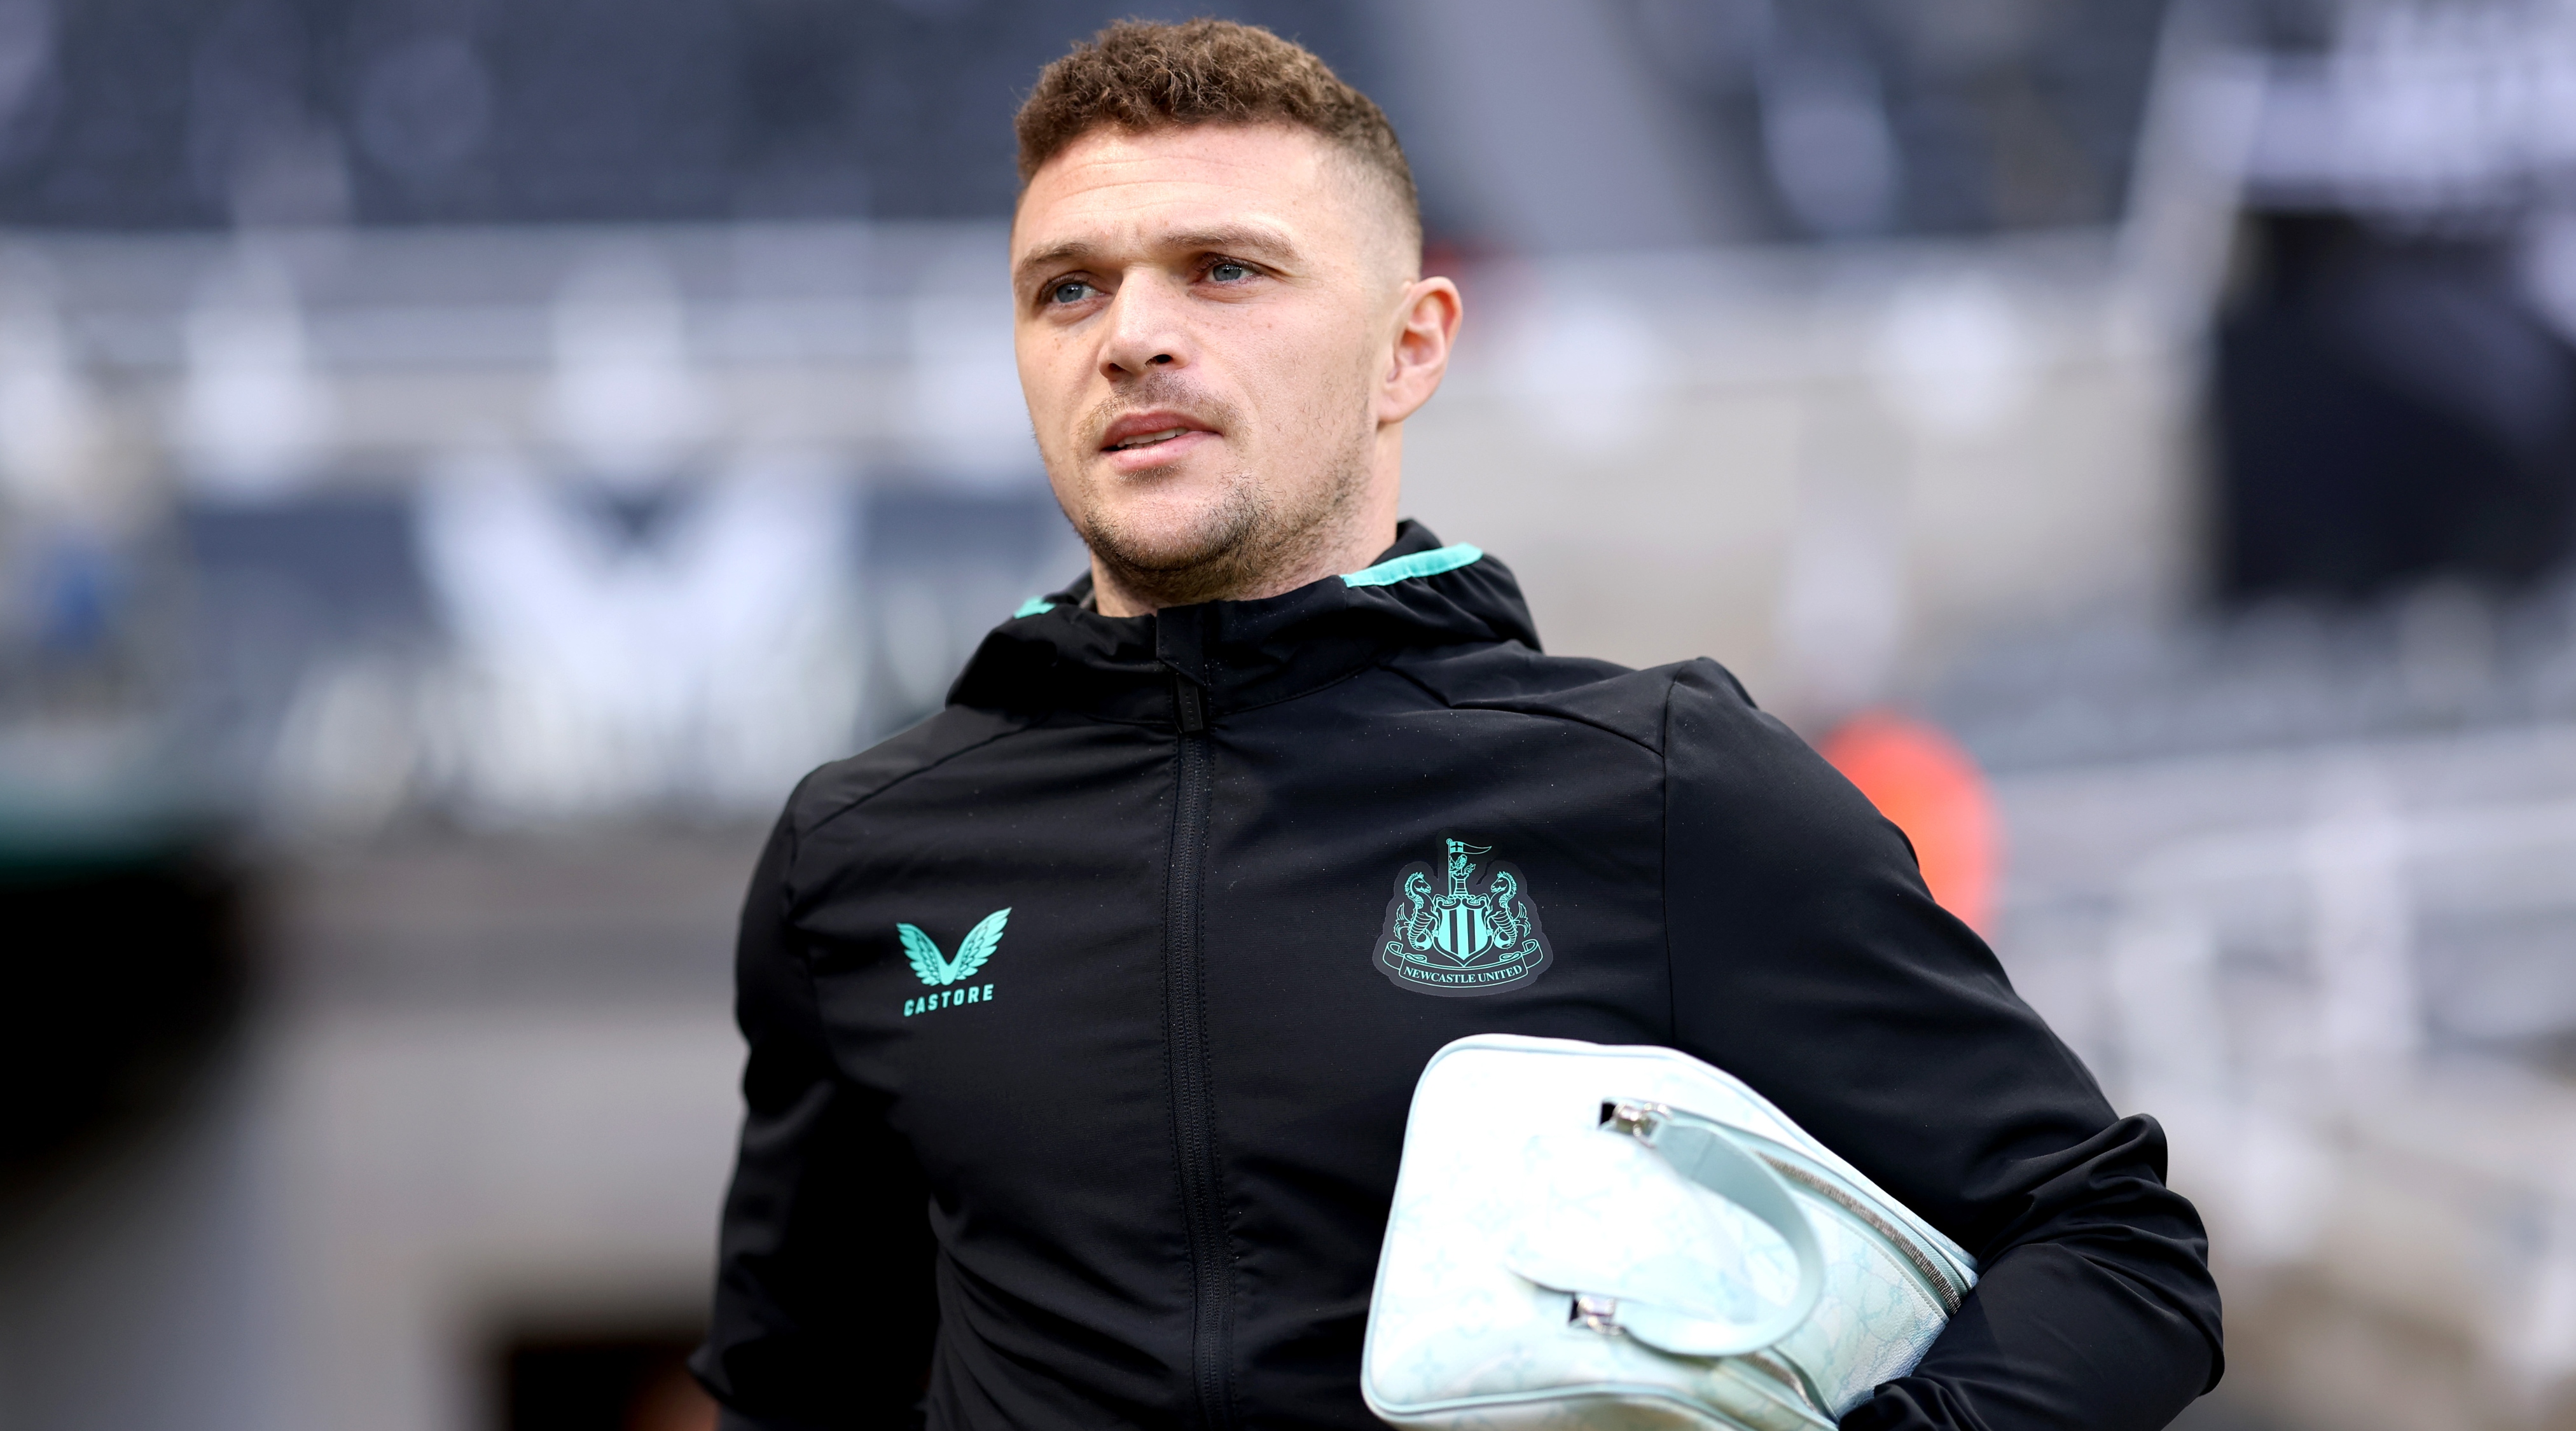 NEWCASTLE UPON TYNE, ENGLAND - JANUARY 13: Kieran Trippier of Newcastle United arrives at the stadium prior to the Premier League match between Newcastle United and Manchester City at St. James' Park on January 13, 2024 in Newcastle upon Tyne, England. (Photo by Alex Livesey/Getty Images)